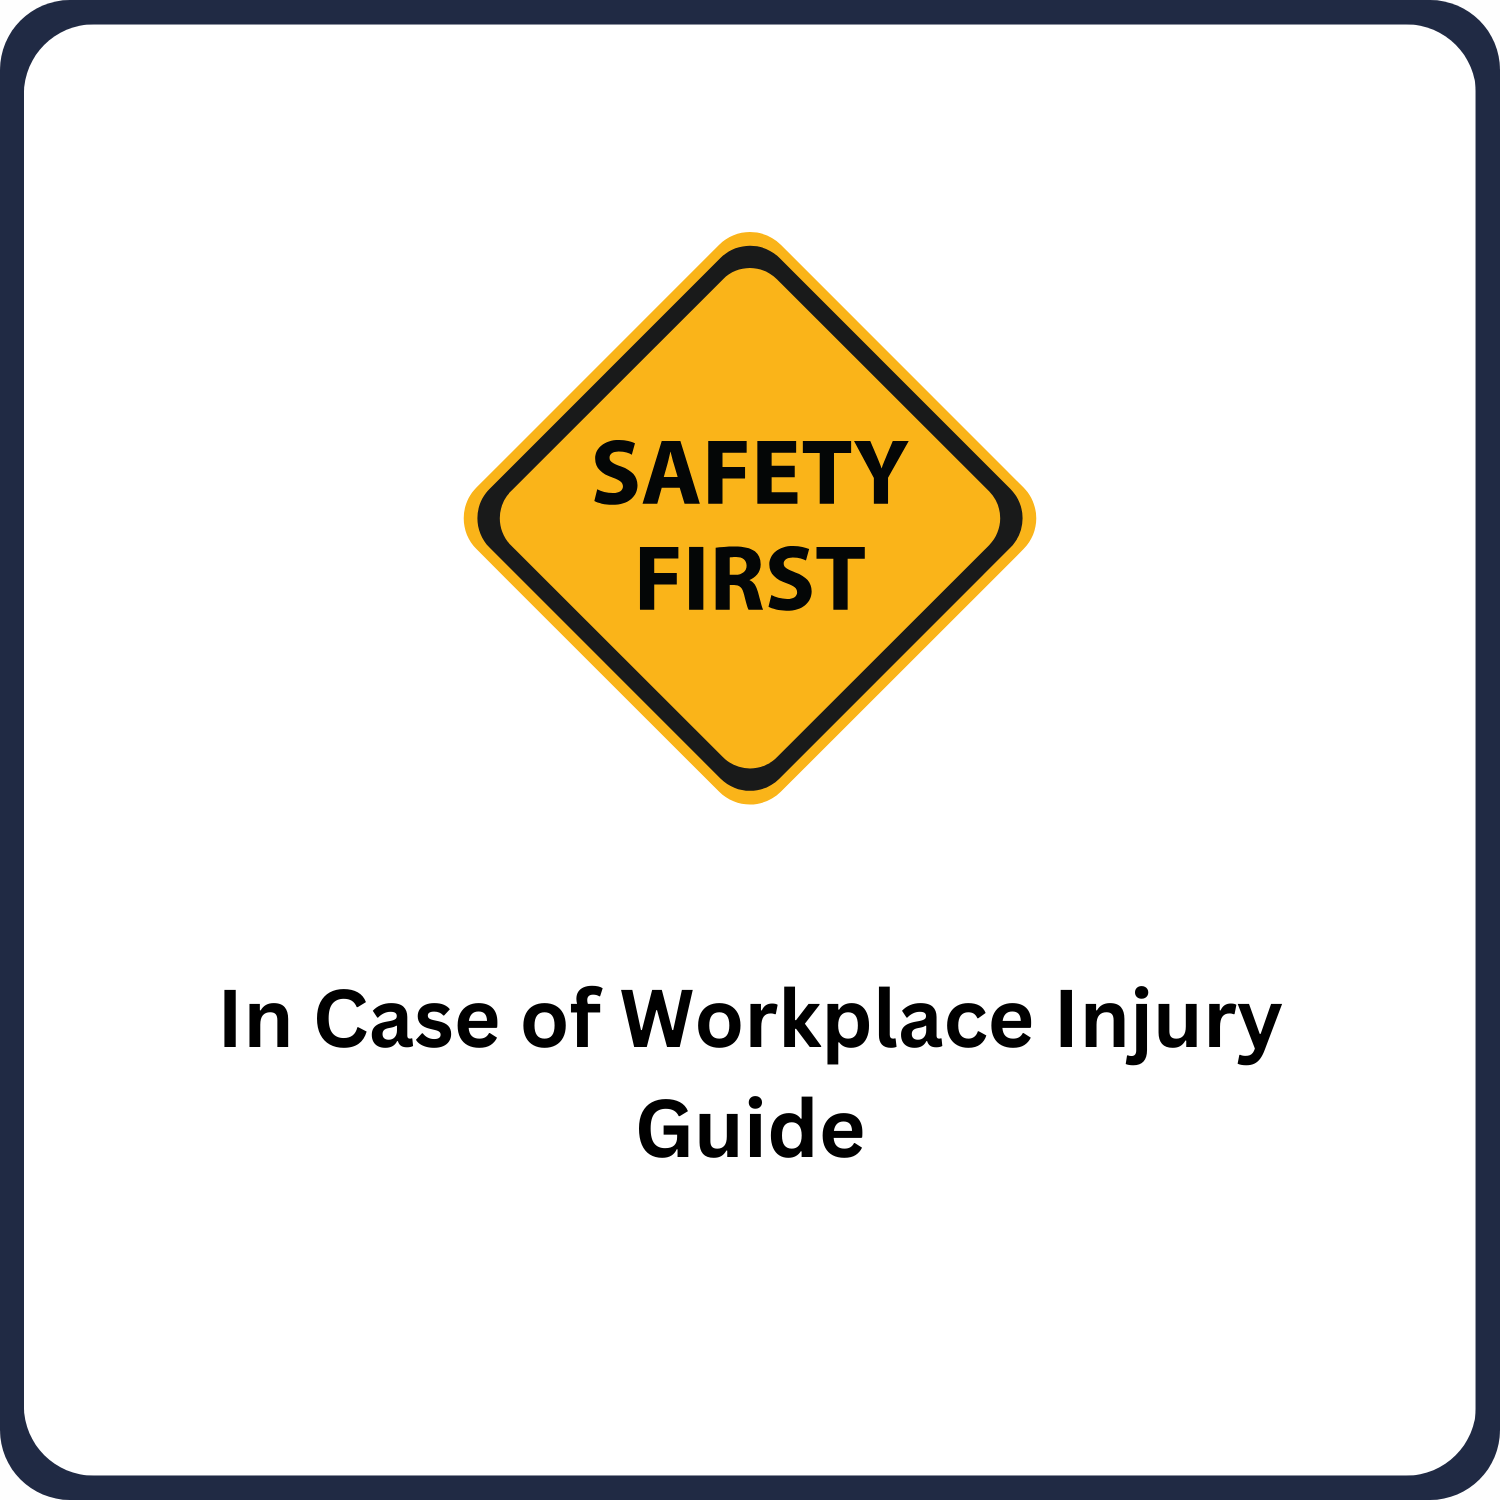 In Case of Workplace Injury Guide